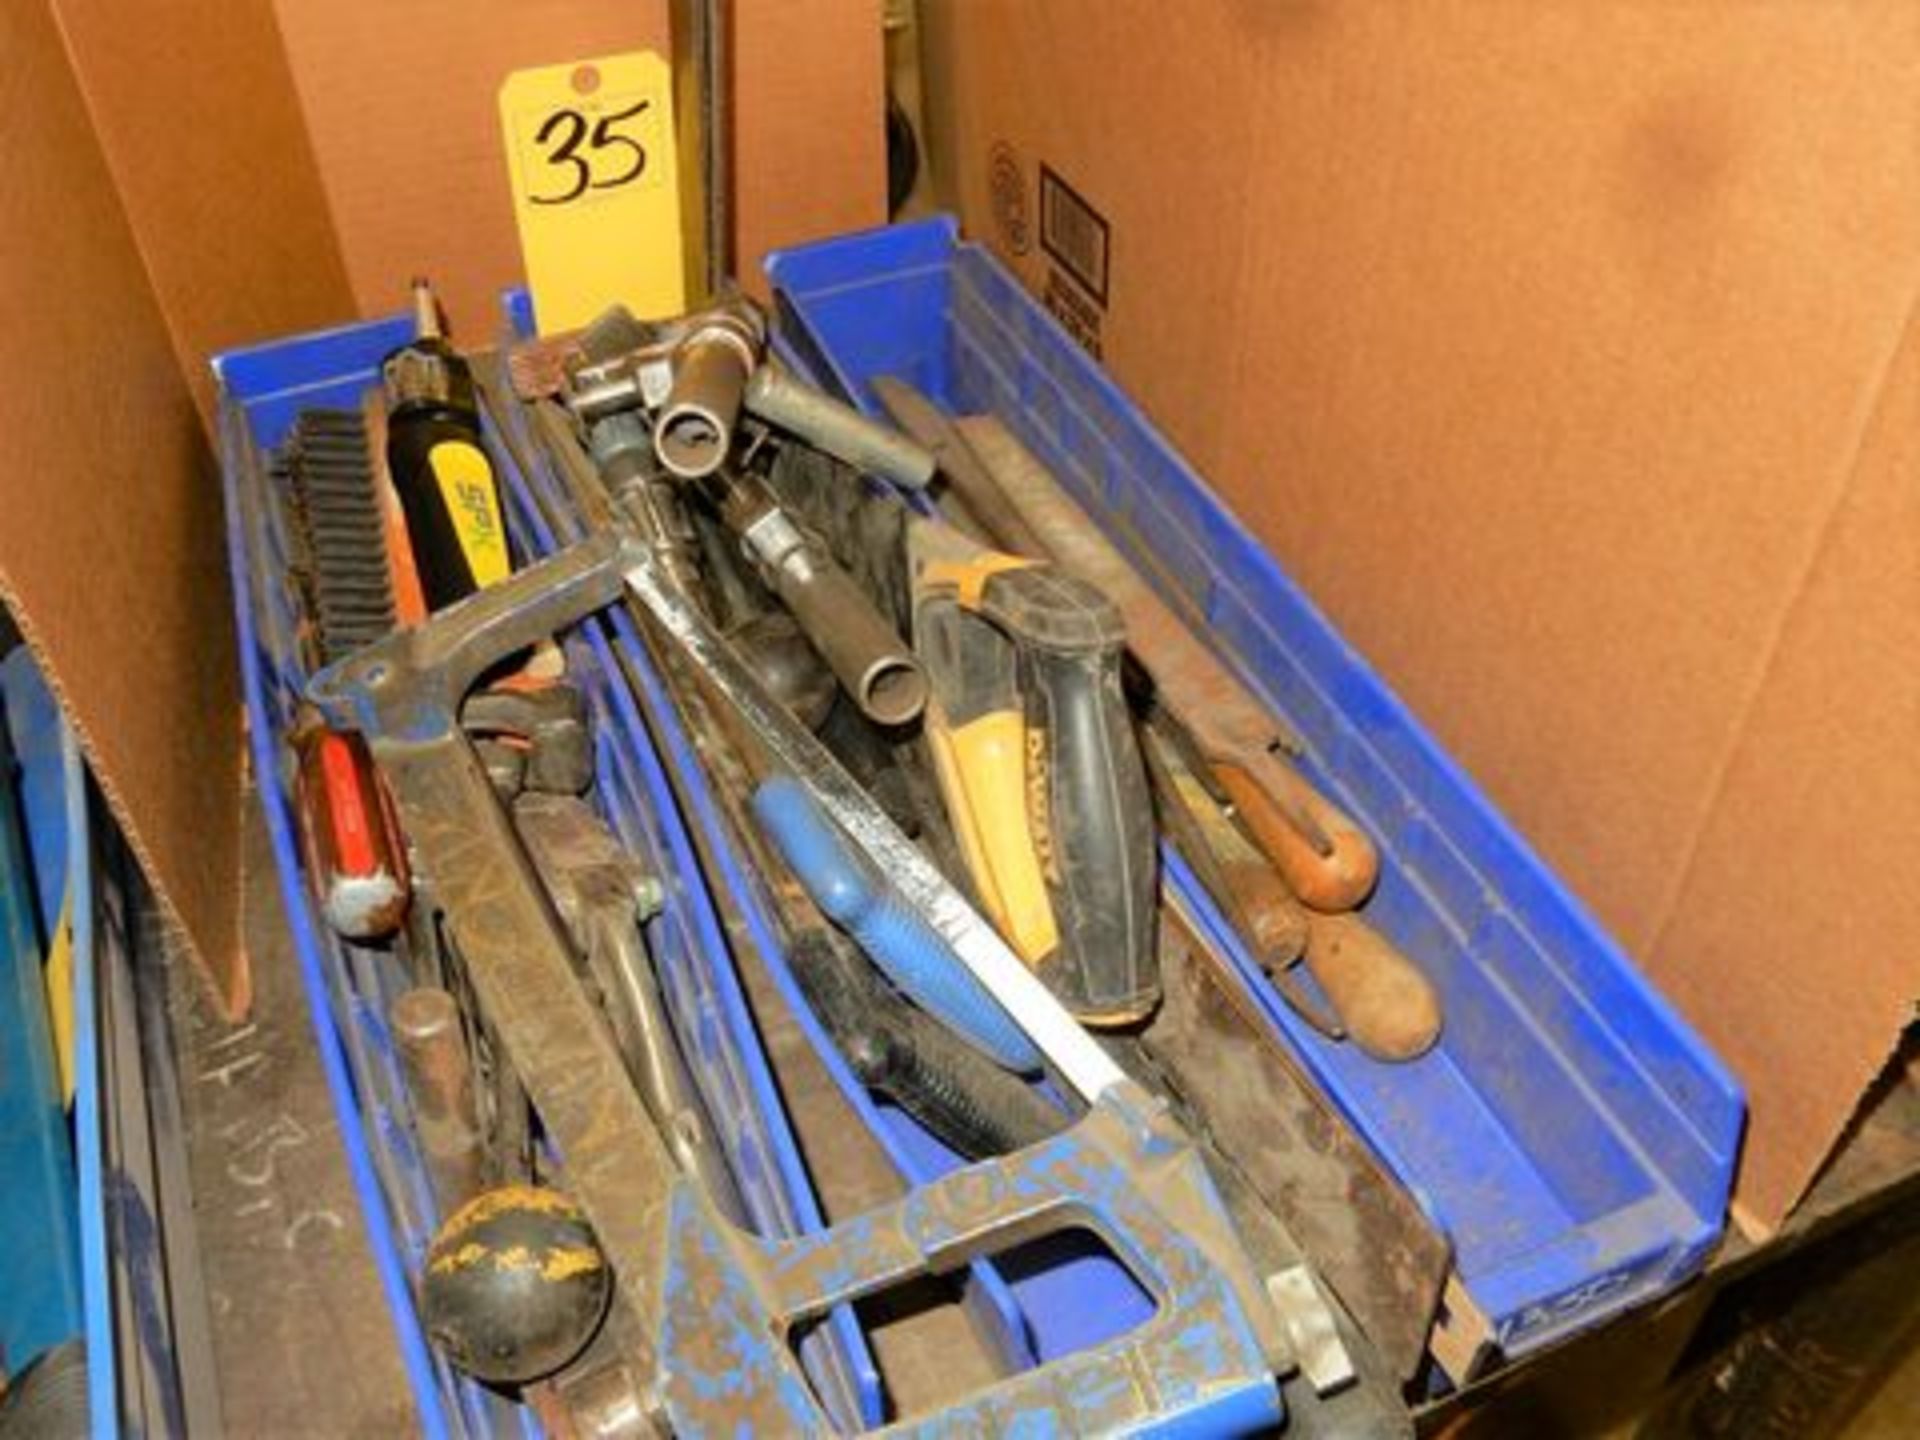 LOT MISC. TOOLS TO INCLUDE - FLAT FILES, WIRE BRUSHES, HAND SAWS